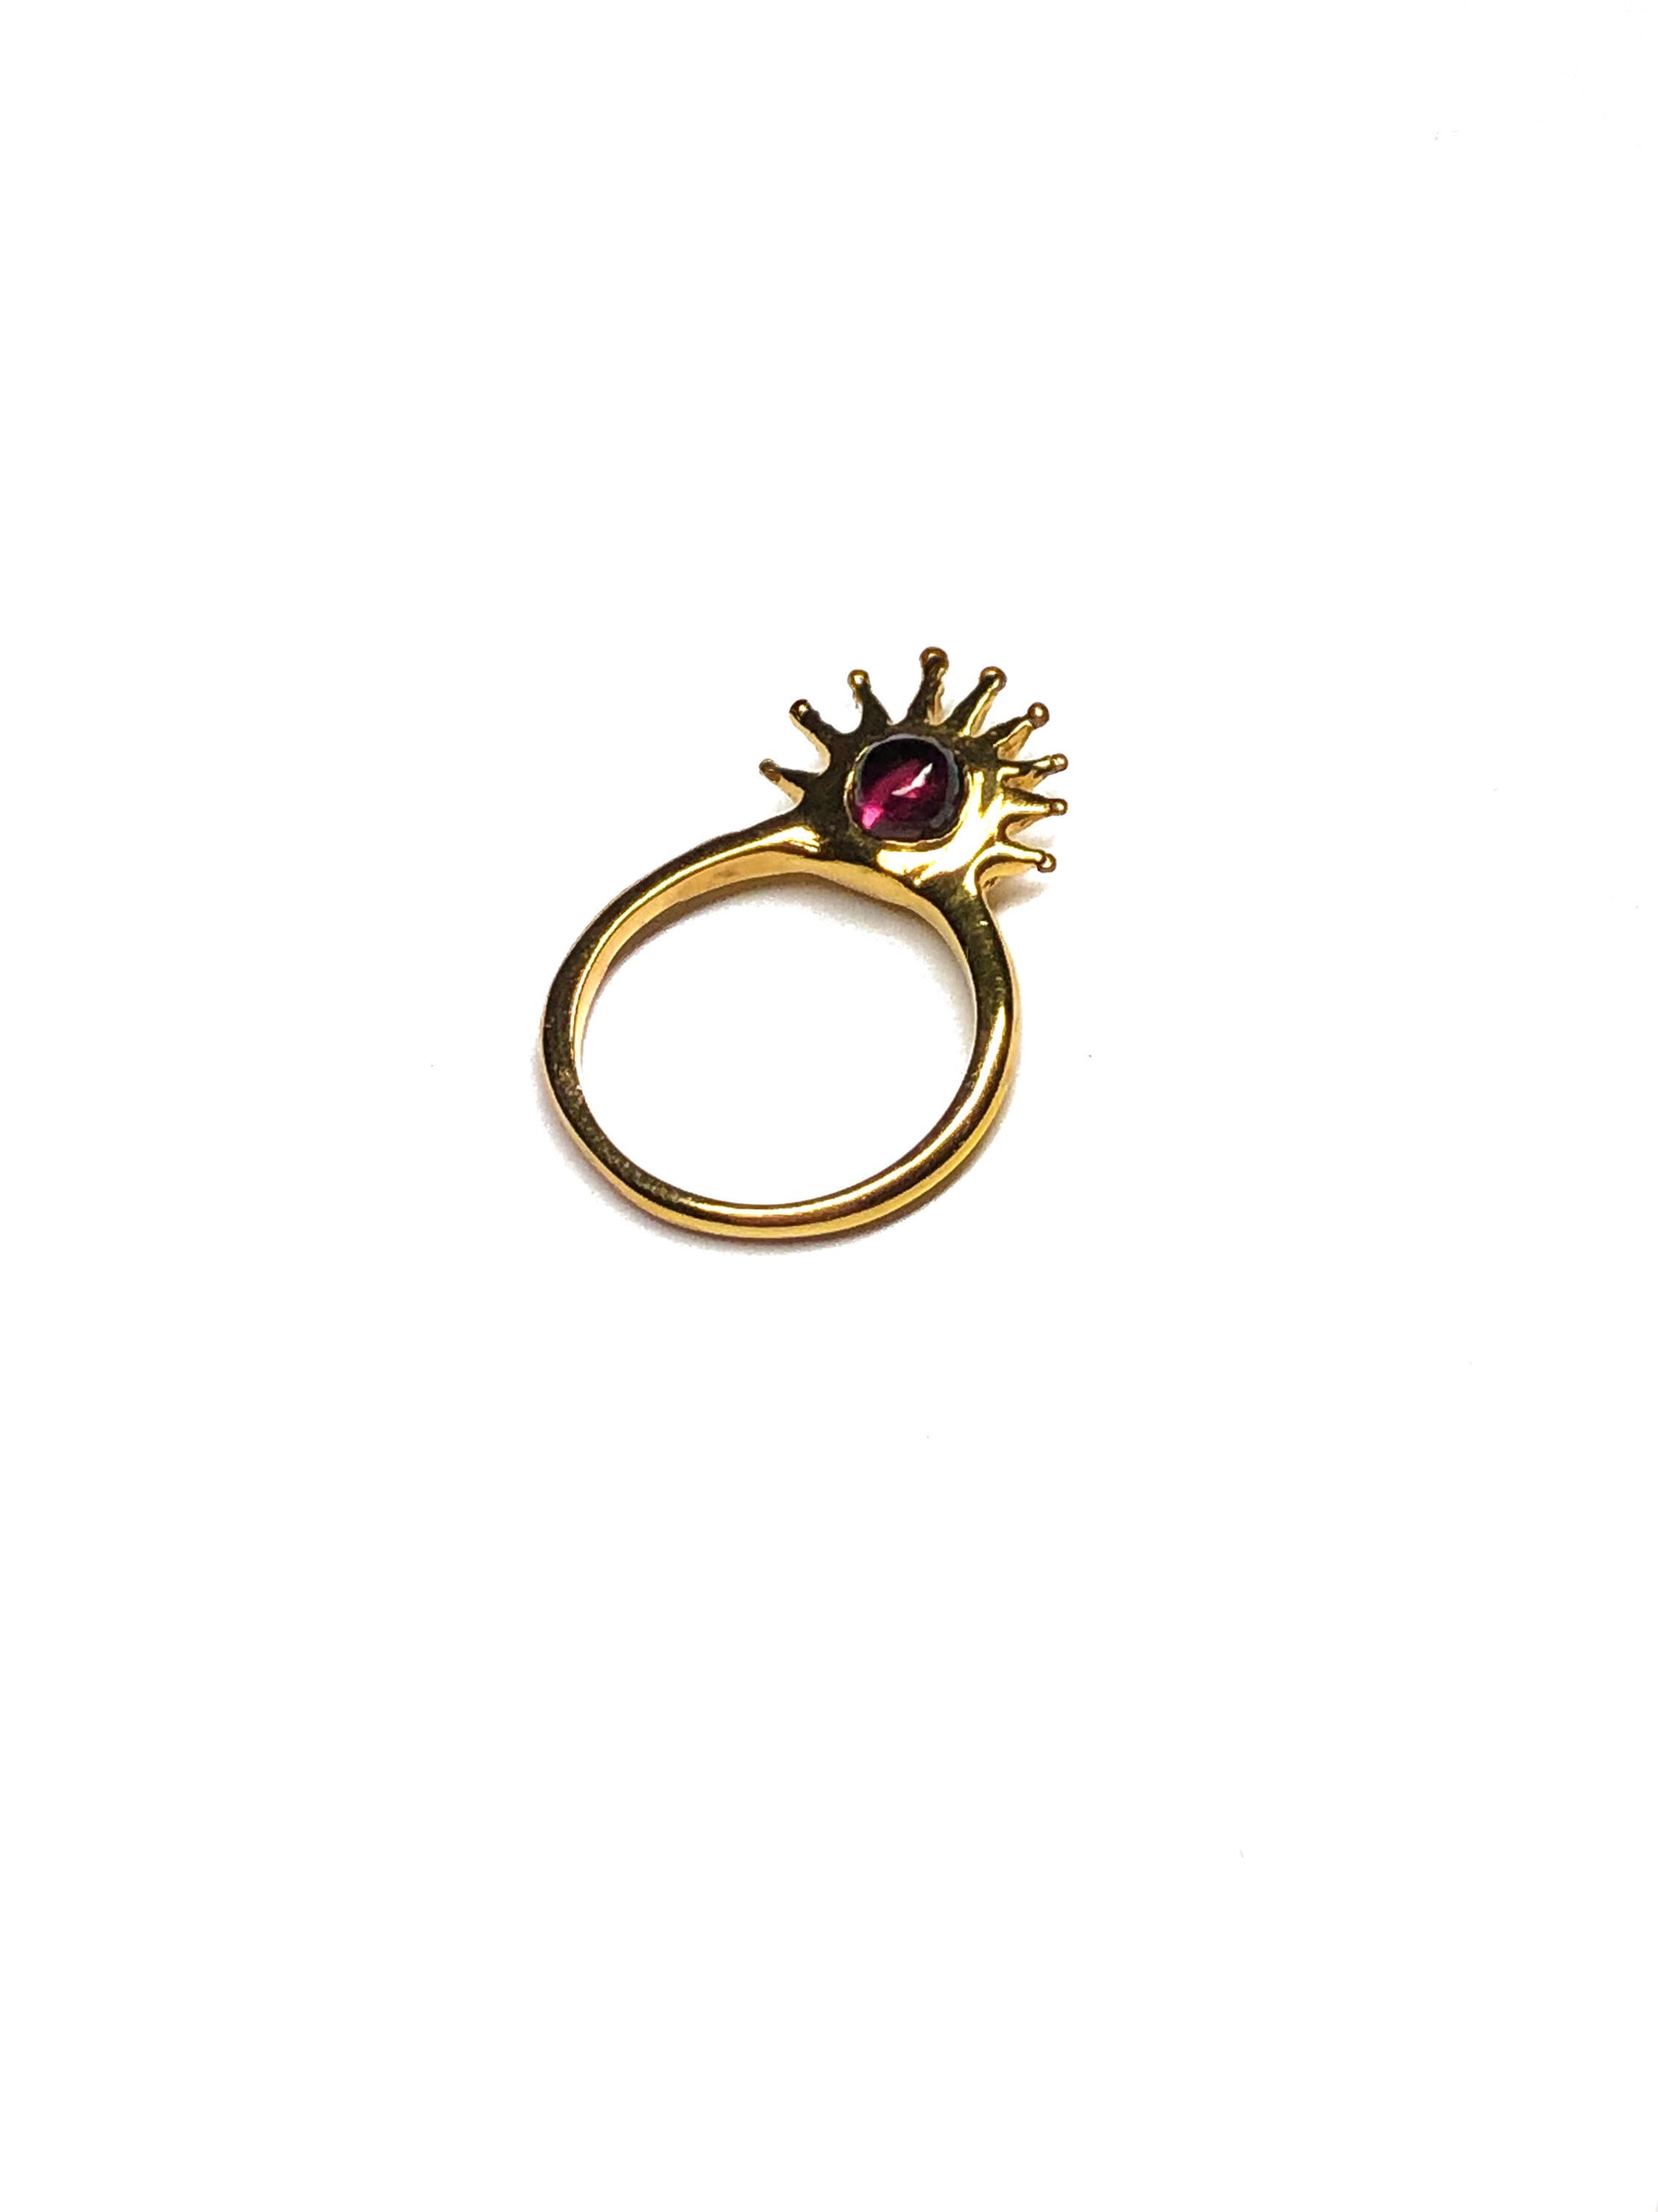 Product photo of Sol Ring by CLARK in 18K Gold Vermeil. This ring is on white ground and highlights dynamic sun design. This occasion jewelry item has a garnet gemstone, perfect gift for a January birthday or any celebration or wedding. 